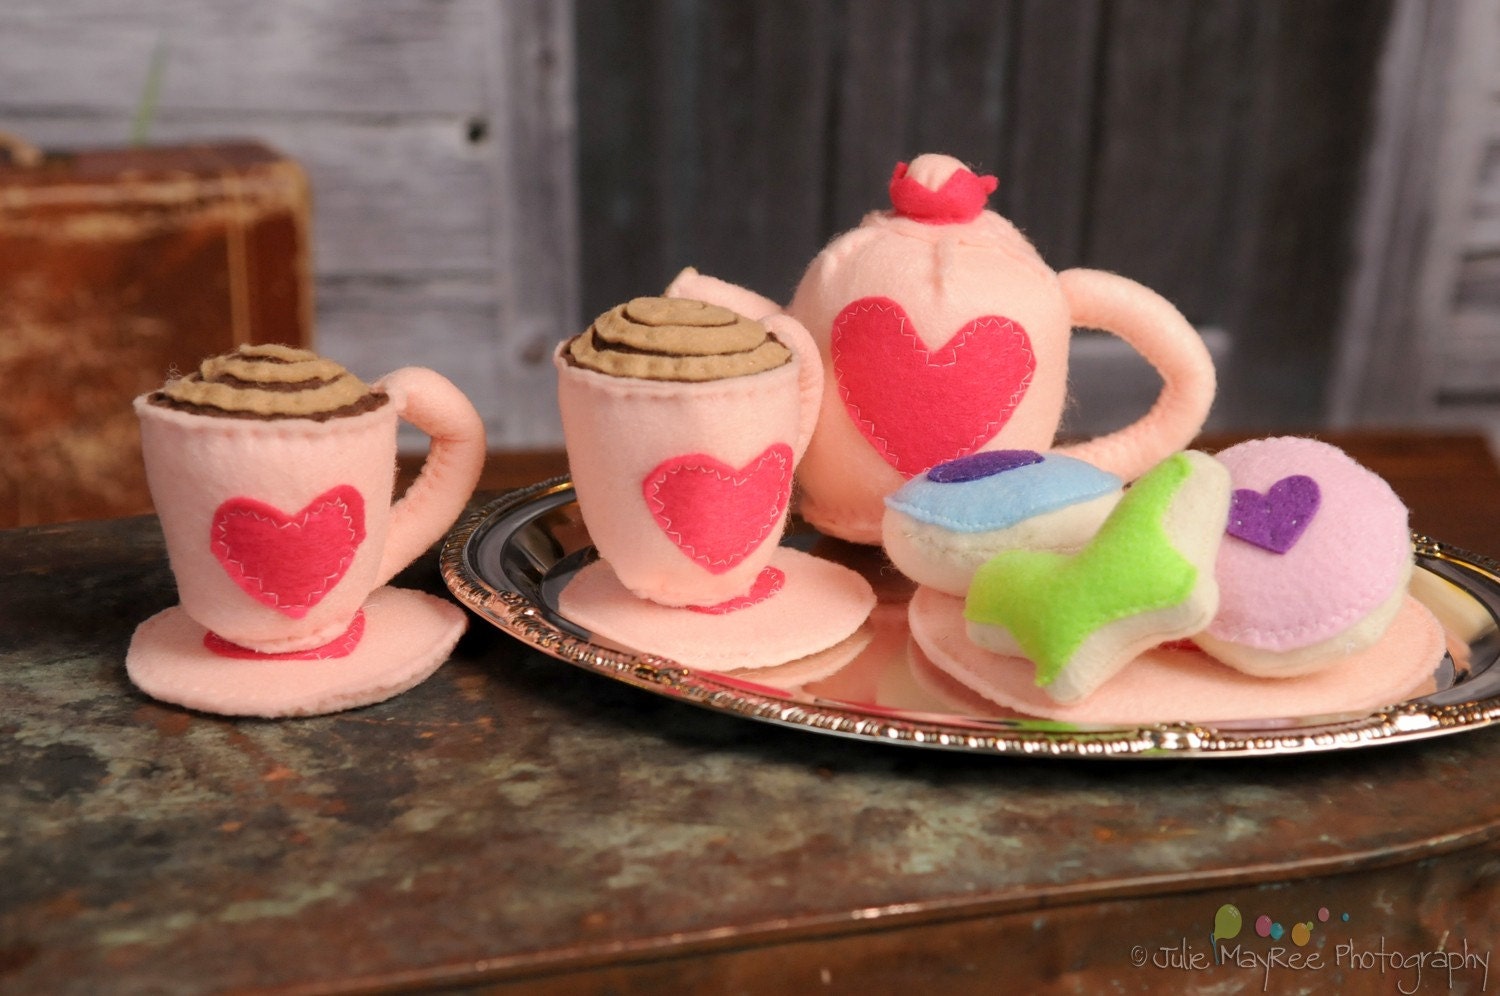 TEA SET - Eco Friendly Felt Play Food - Princess Tea Party Set on Silver Platter - Pink - Deliciously scented sugar cookies - Perfect for Valentine's Day